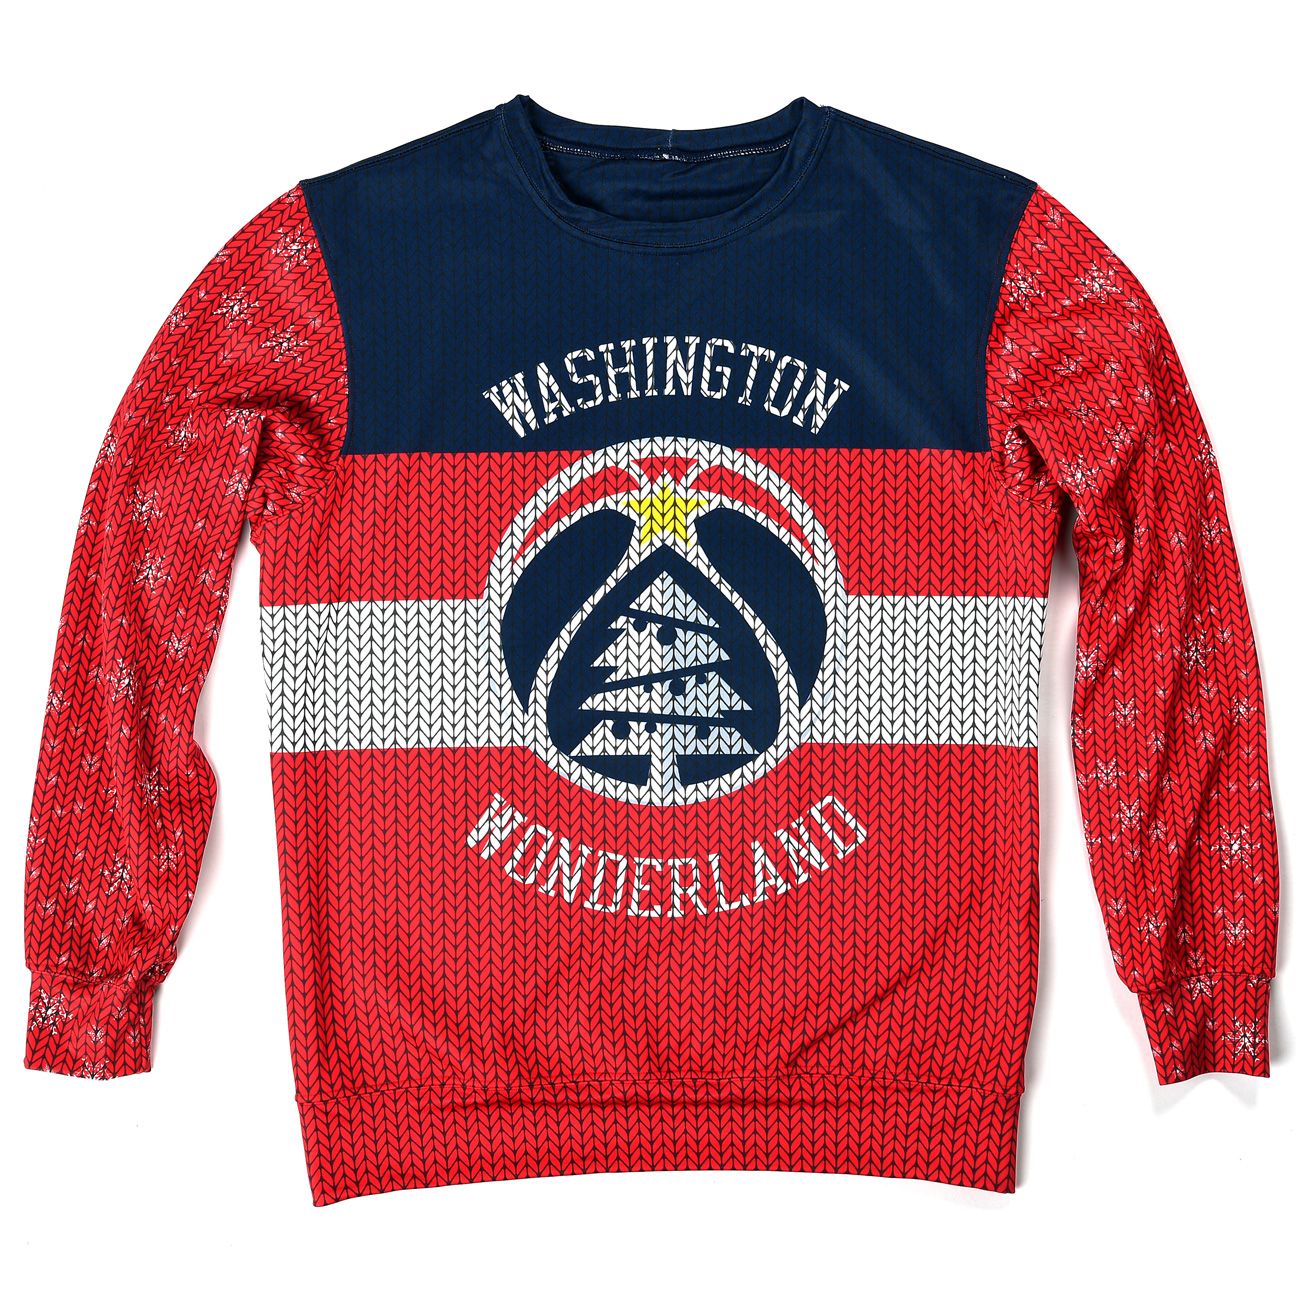 Wizards ugly sweater